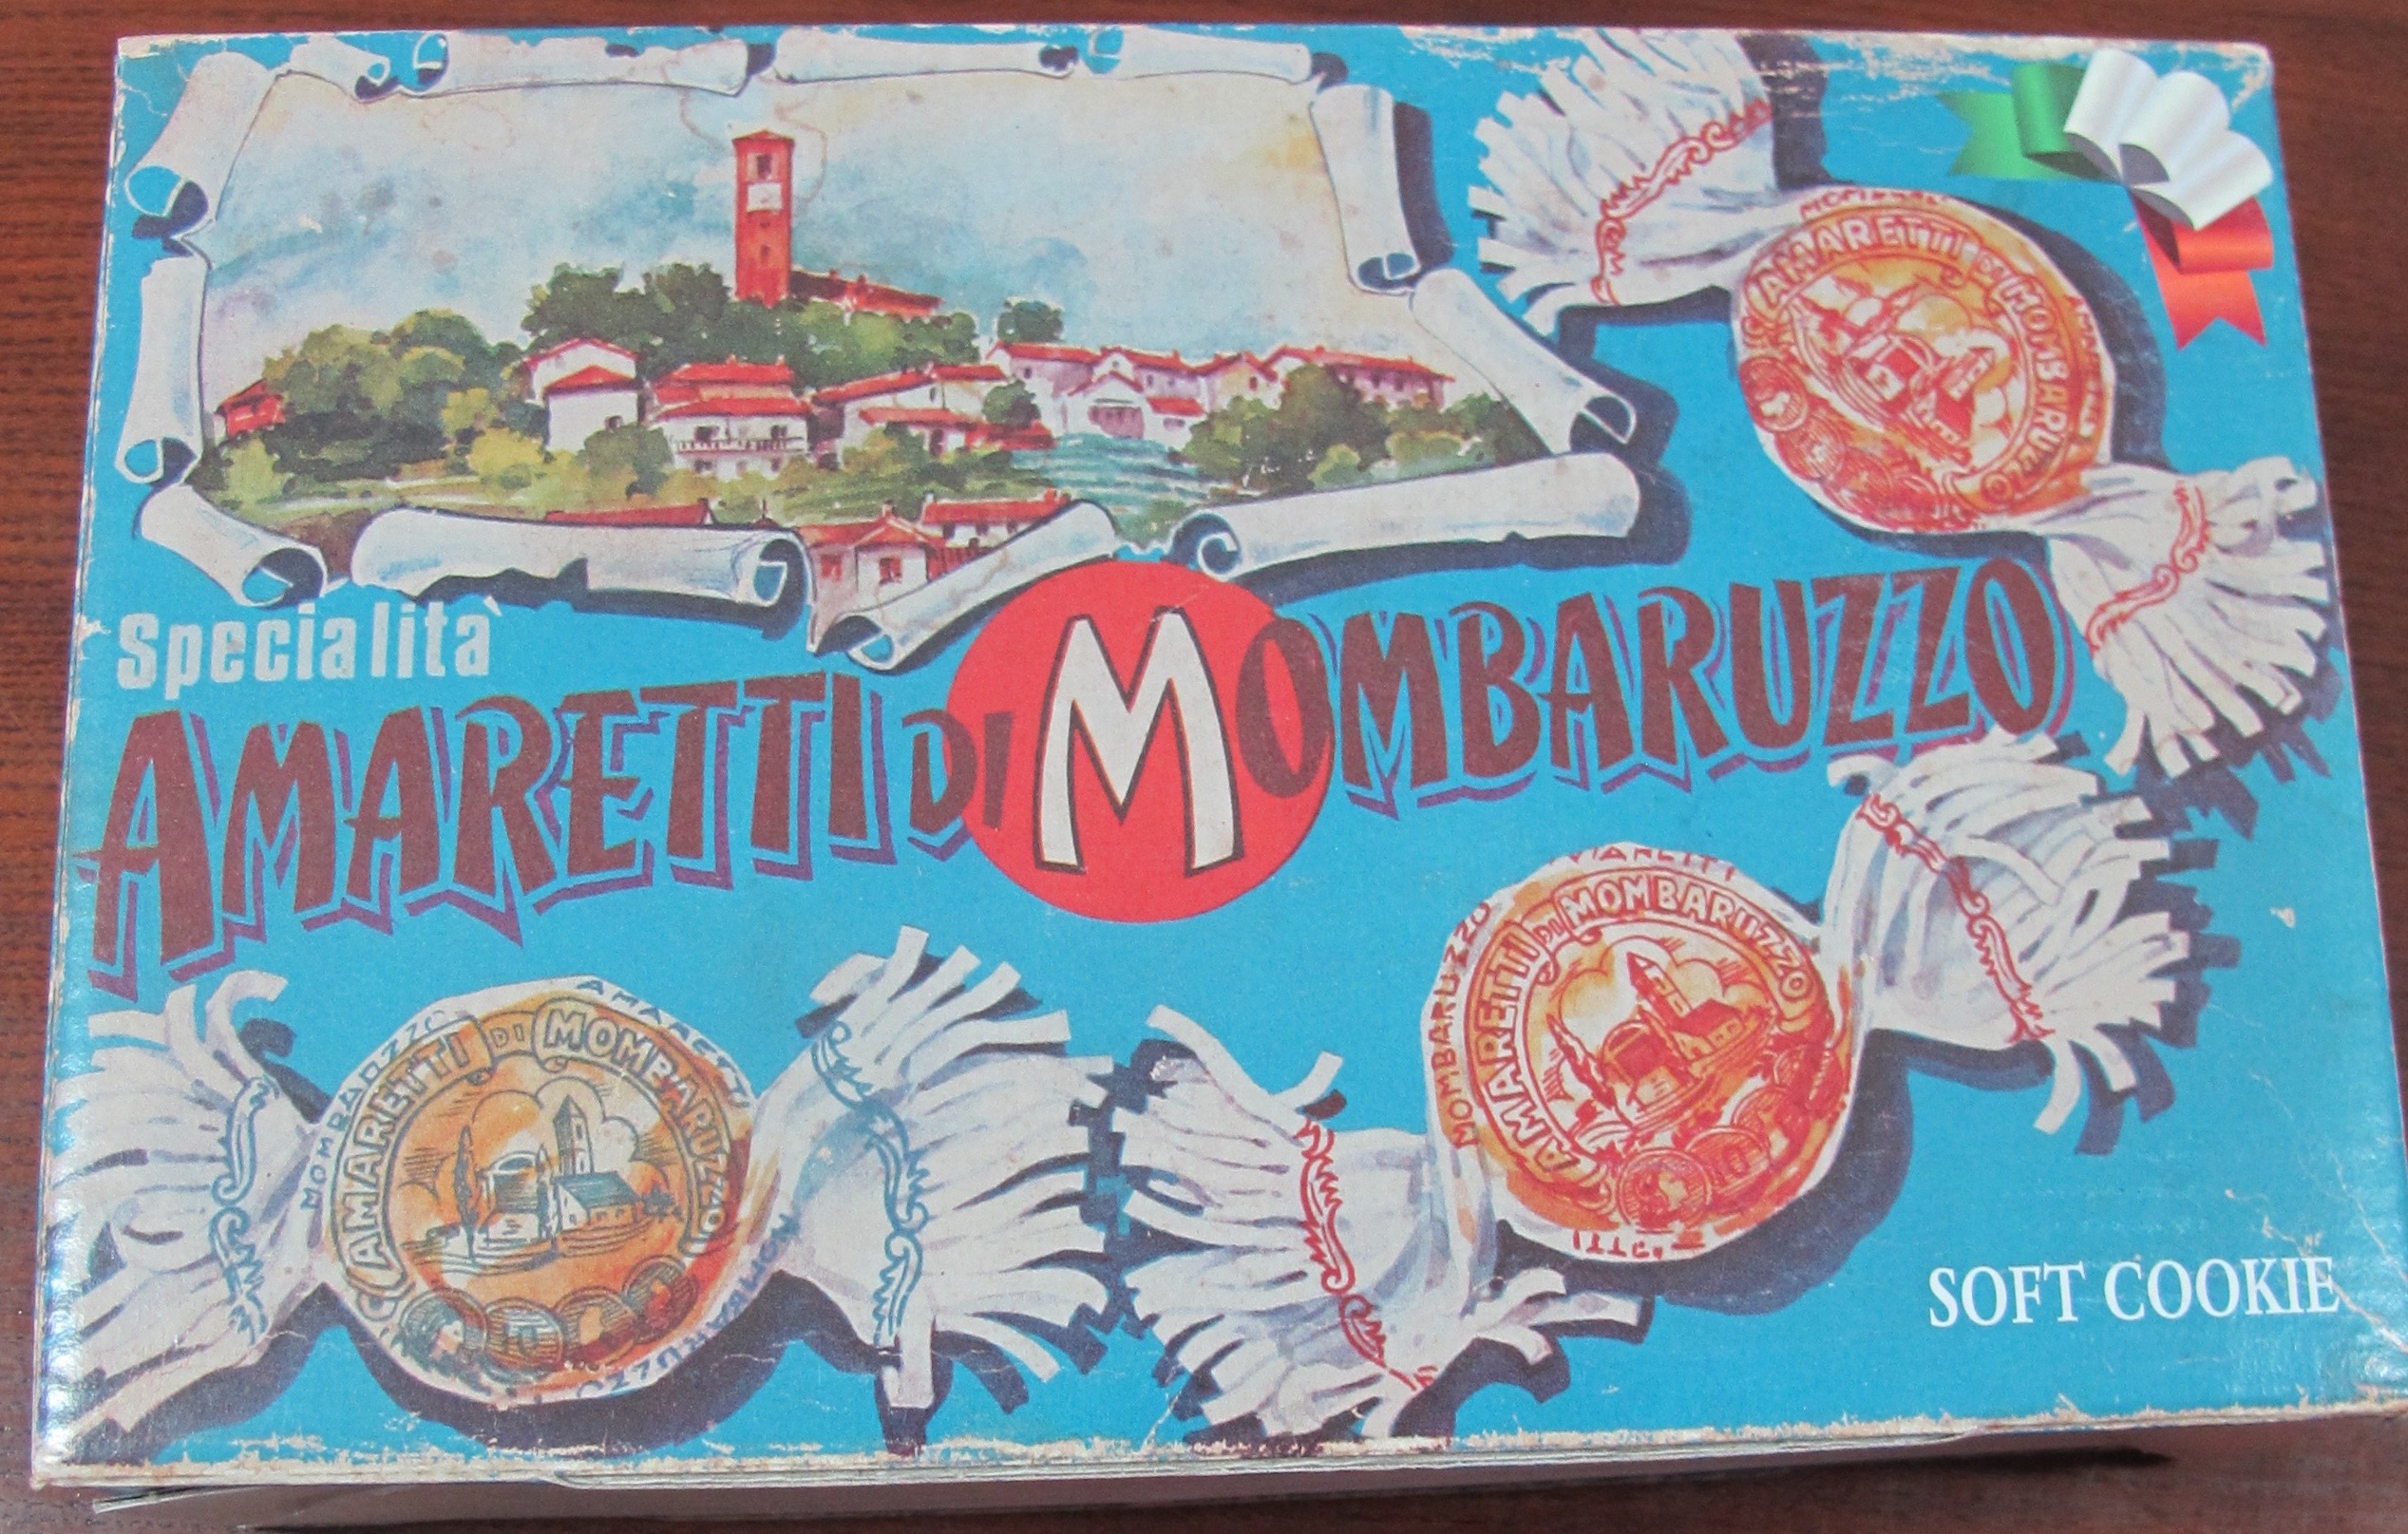 According to local history, Mombaruzzo Amaretti wee first created in the 1700's. Photo by Marla Norman.